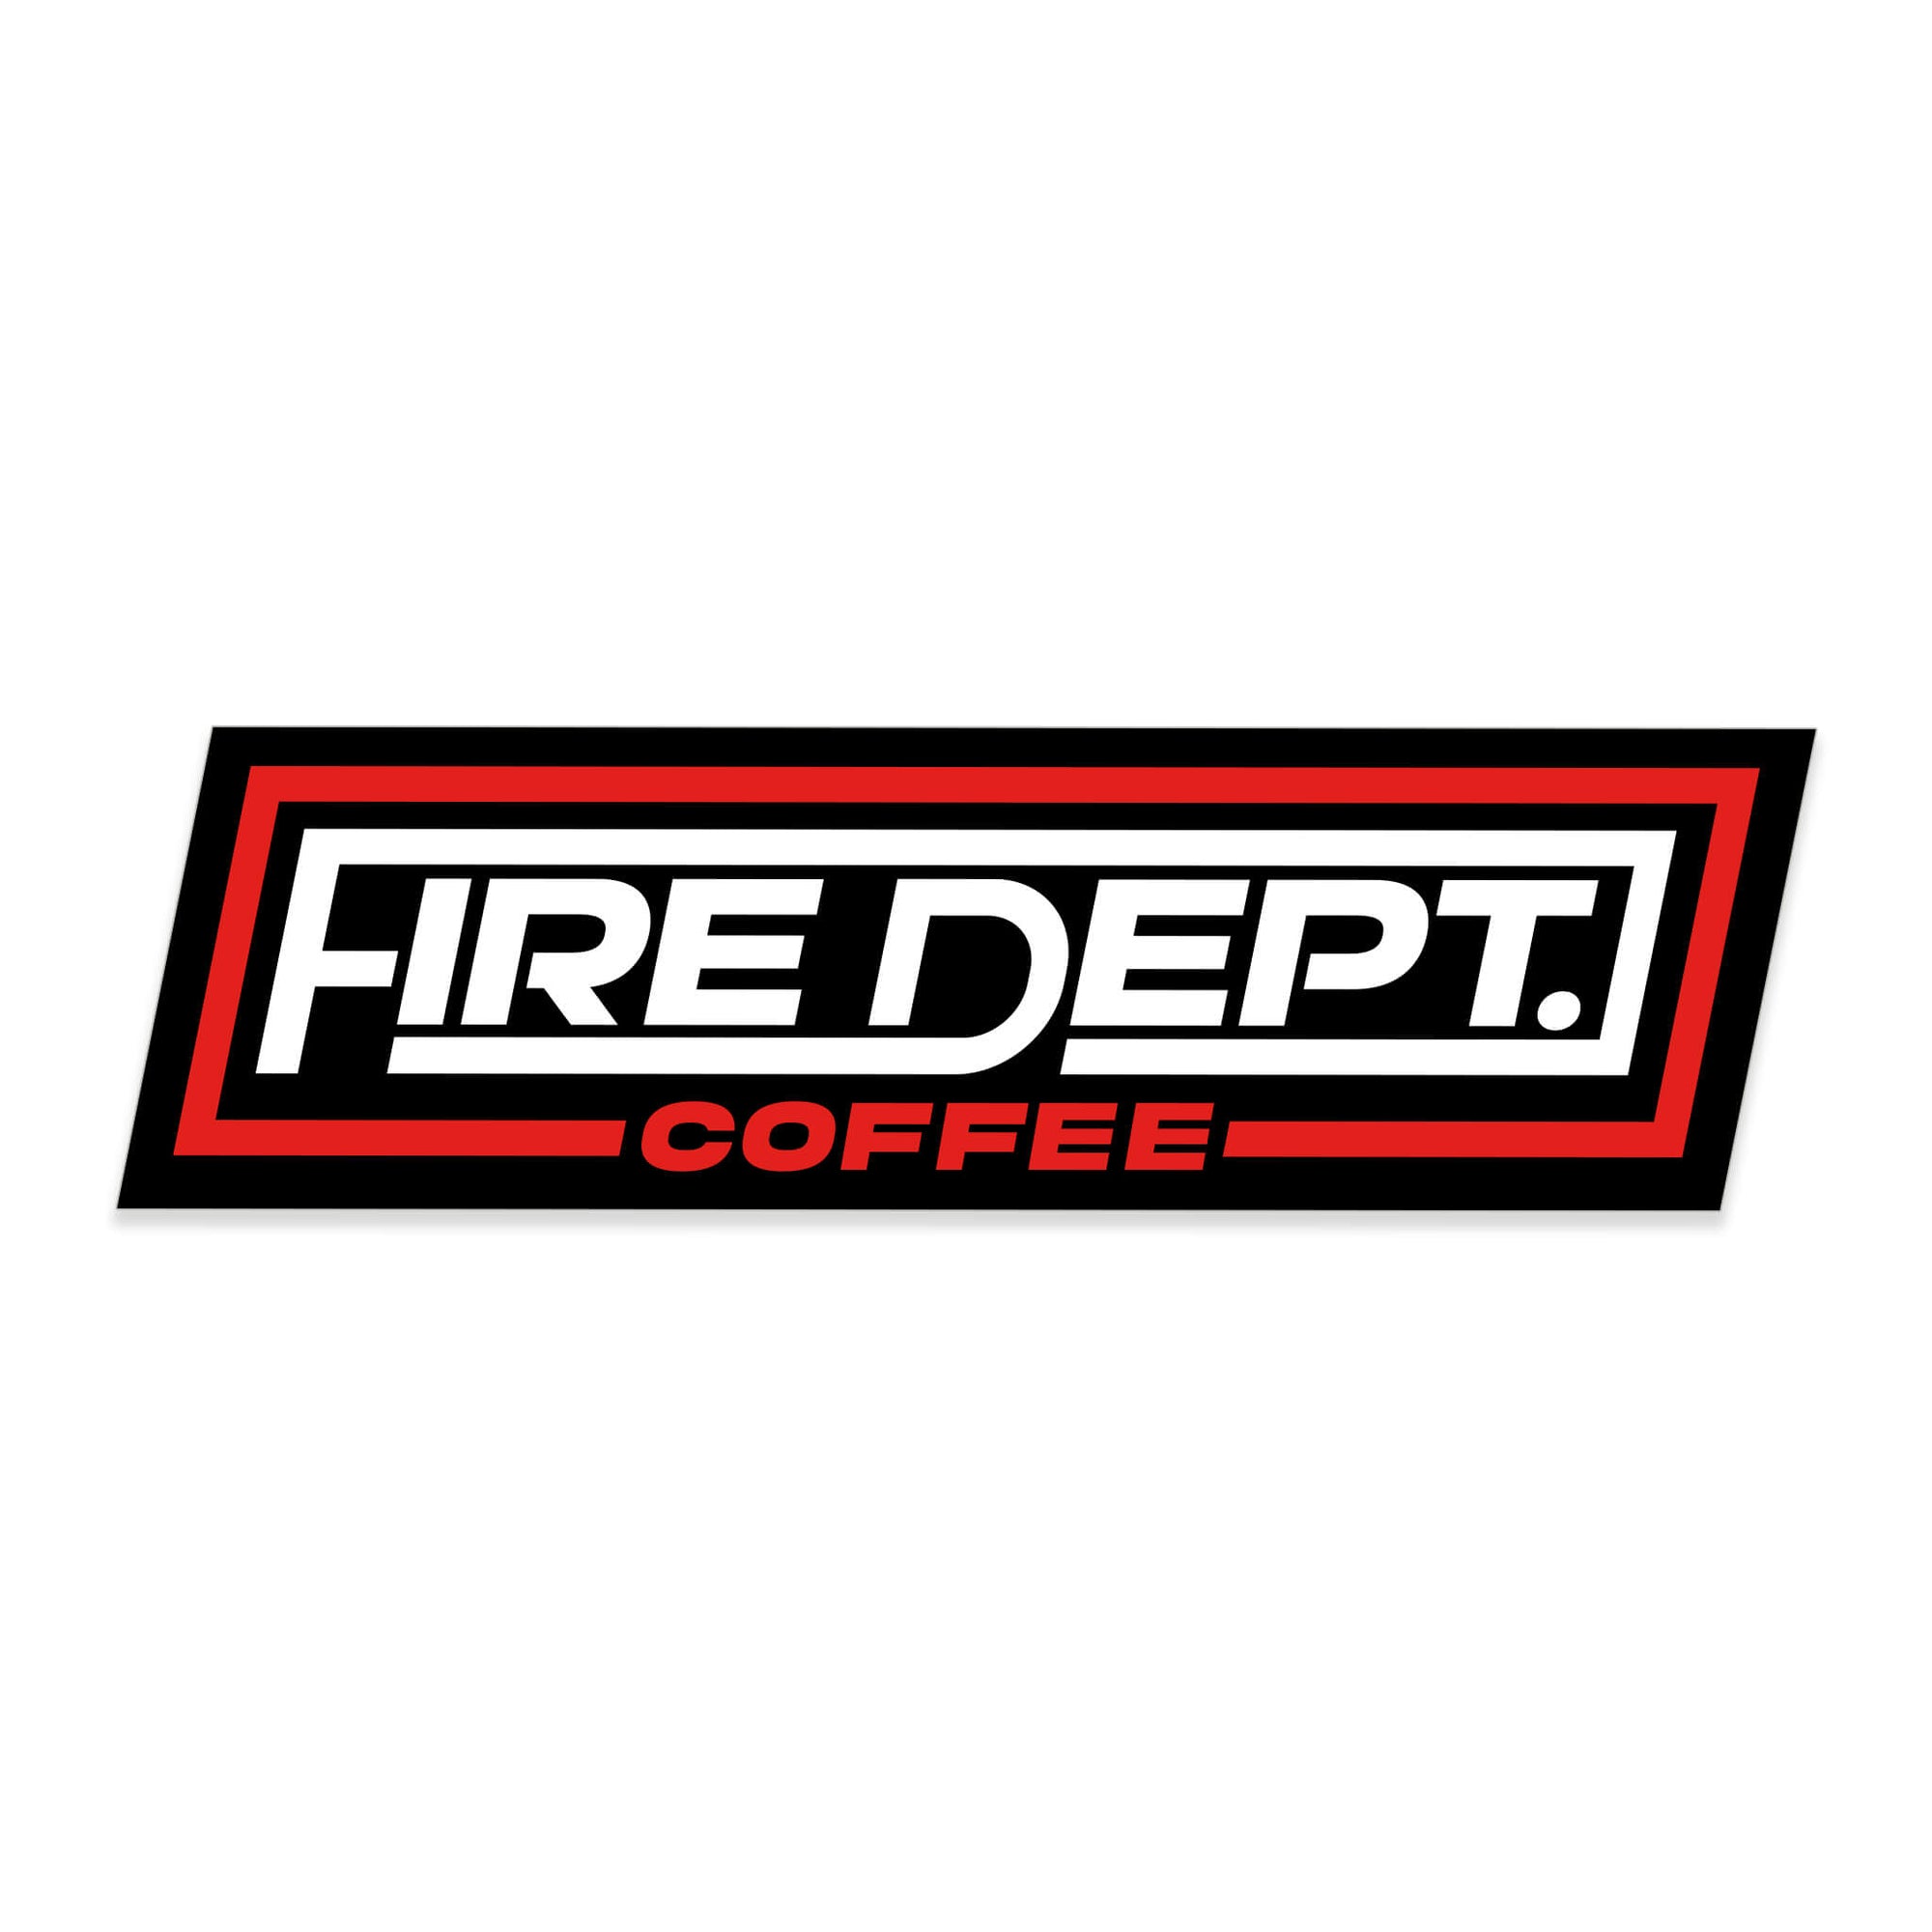 The FDC Extended Sticker features extended letters with a forward motion to represent the feeling of energy that Fire Department Coffee gives you all day long.